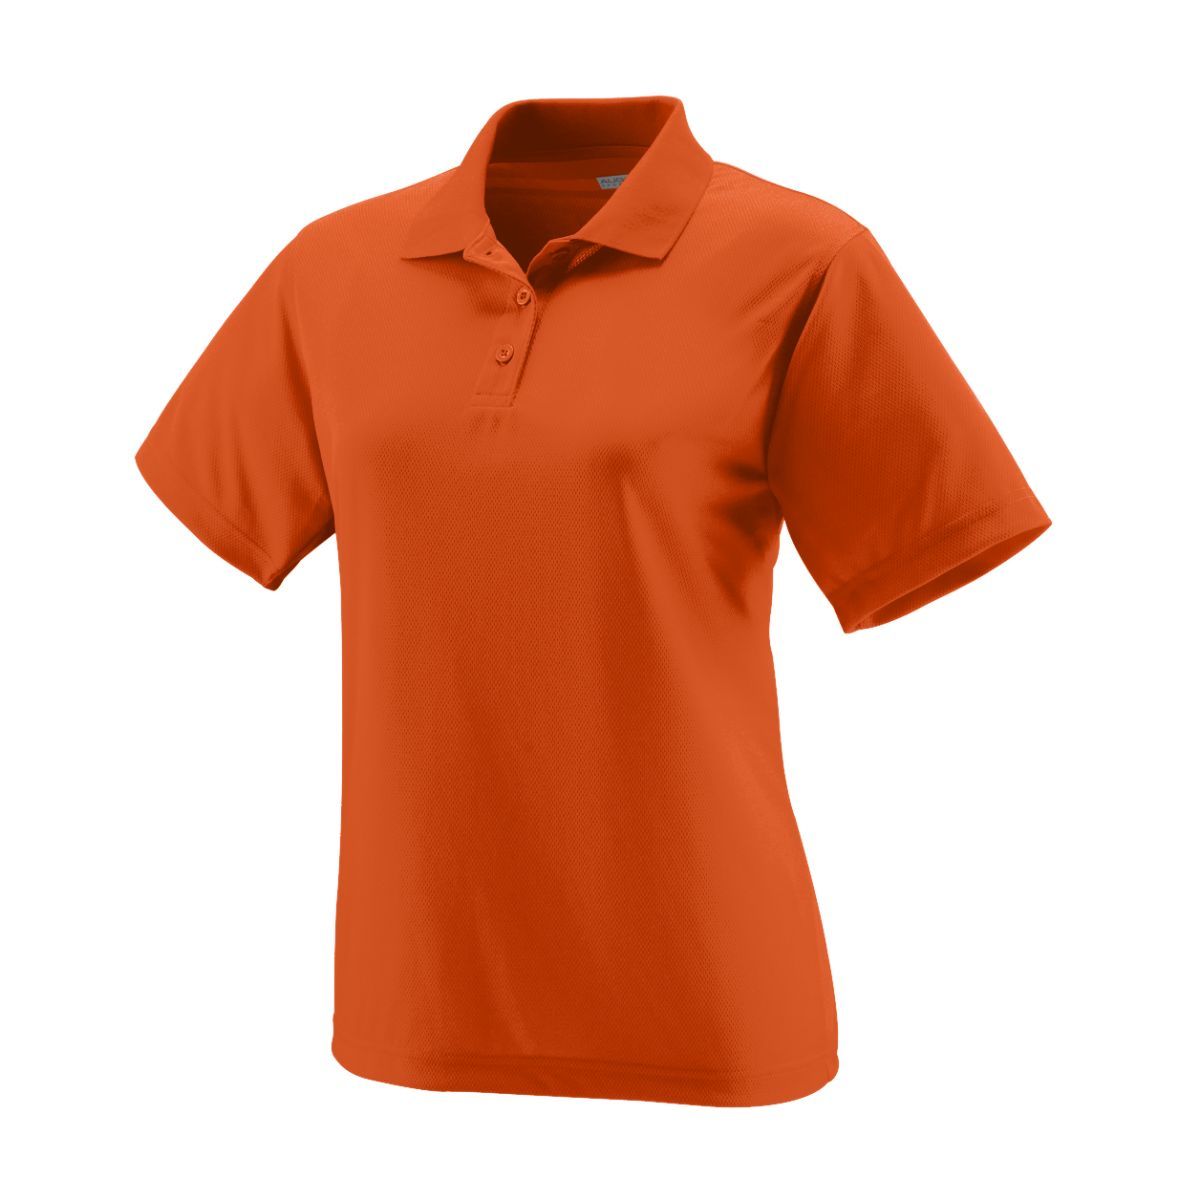 Augusta Sportswear Ladies Wicking Mesh Polo in Orange  -Part of the Ladies, Ladies-Polo, Polos, Augusta-Products, Tennis, Shirts product lines at KanaleyCreations.com